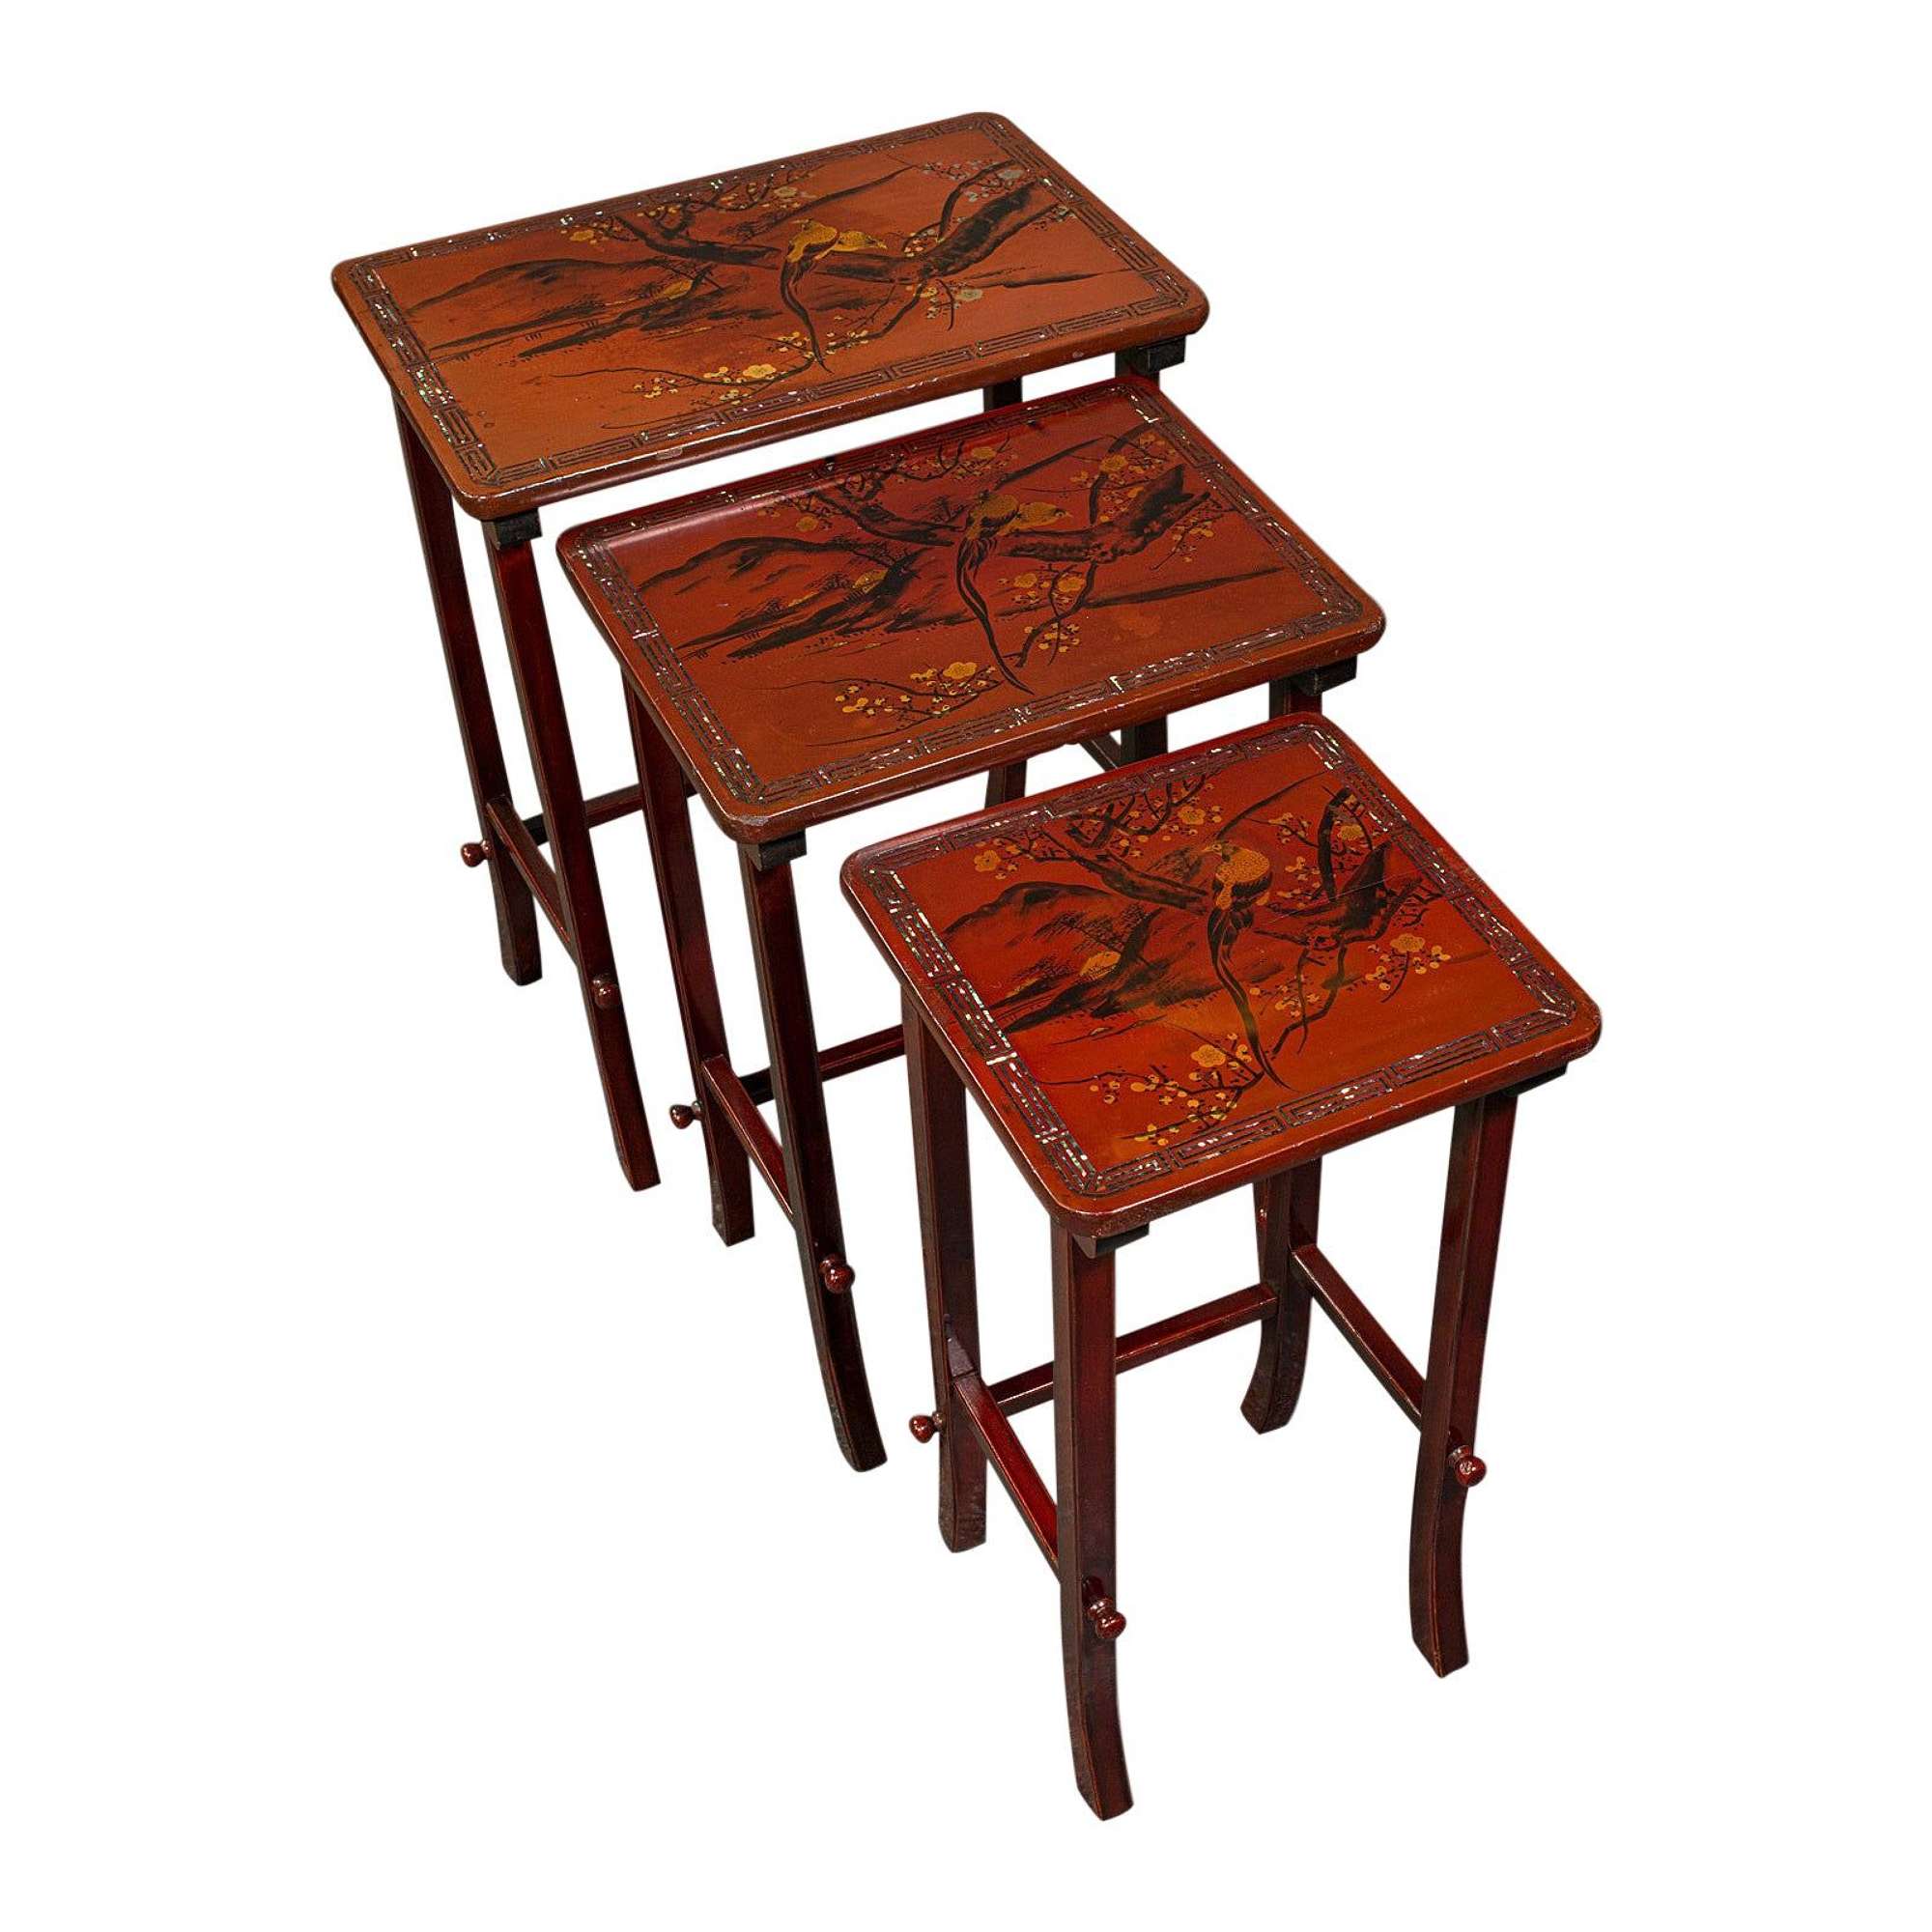 Antique Nest Of 3 Occasional Side Tables, Oriental, Japanned, Victorian, C.1900